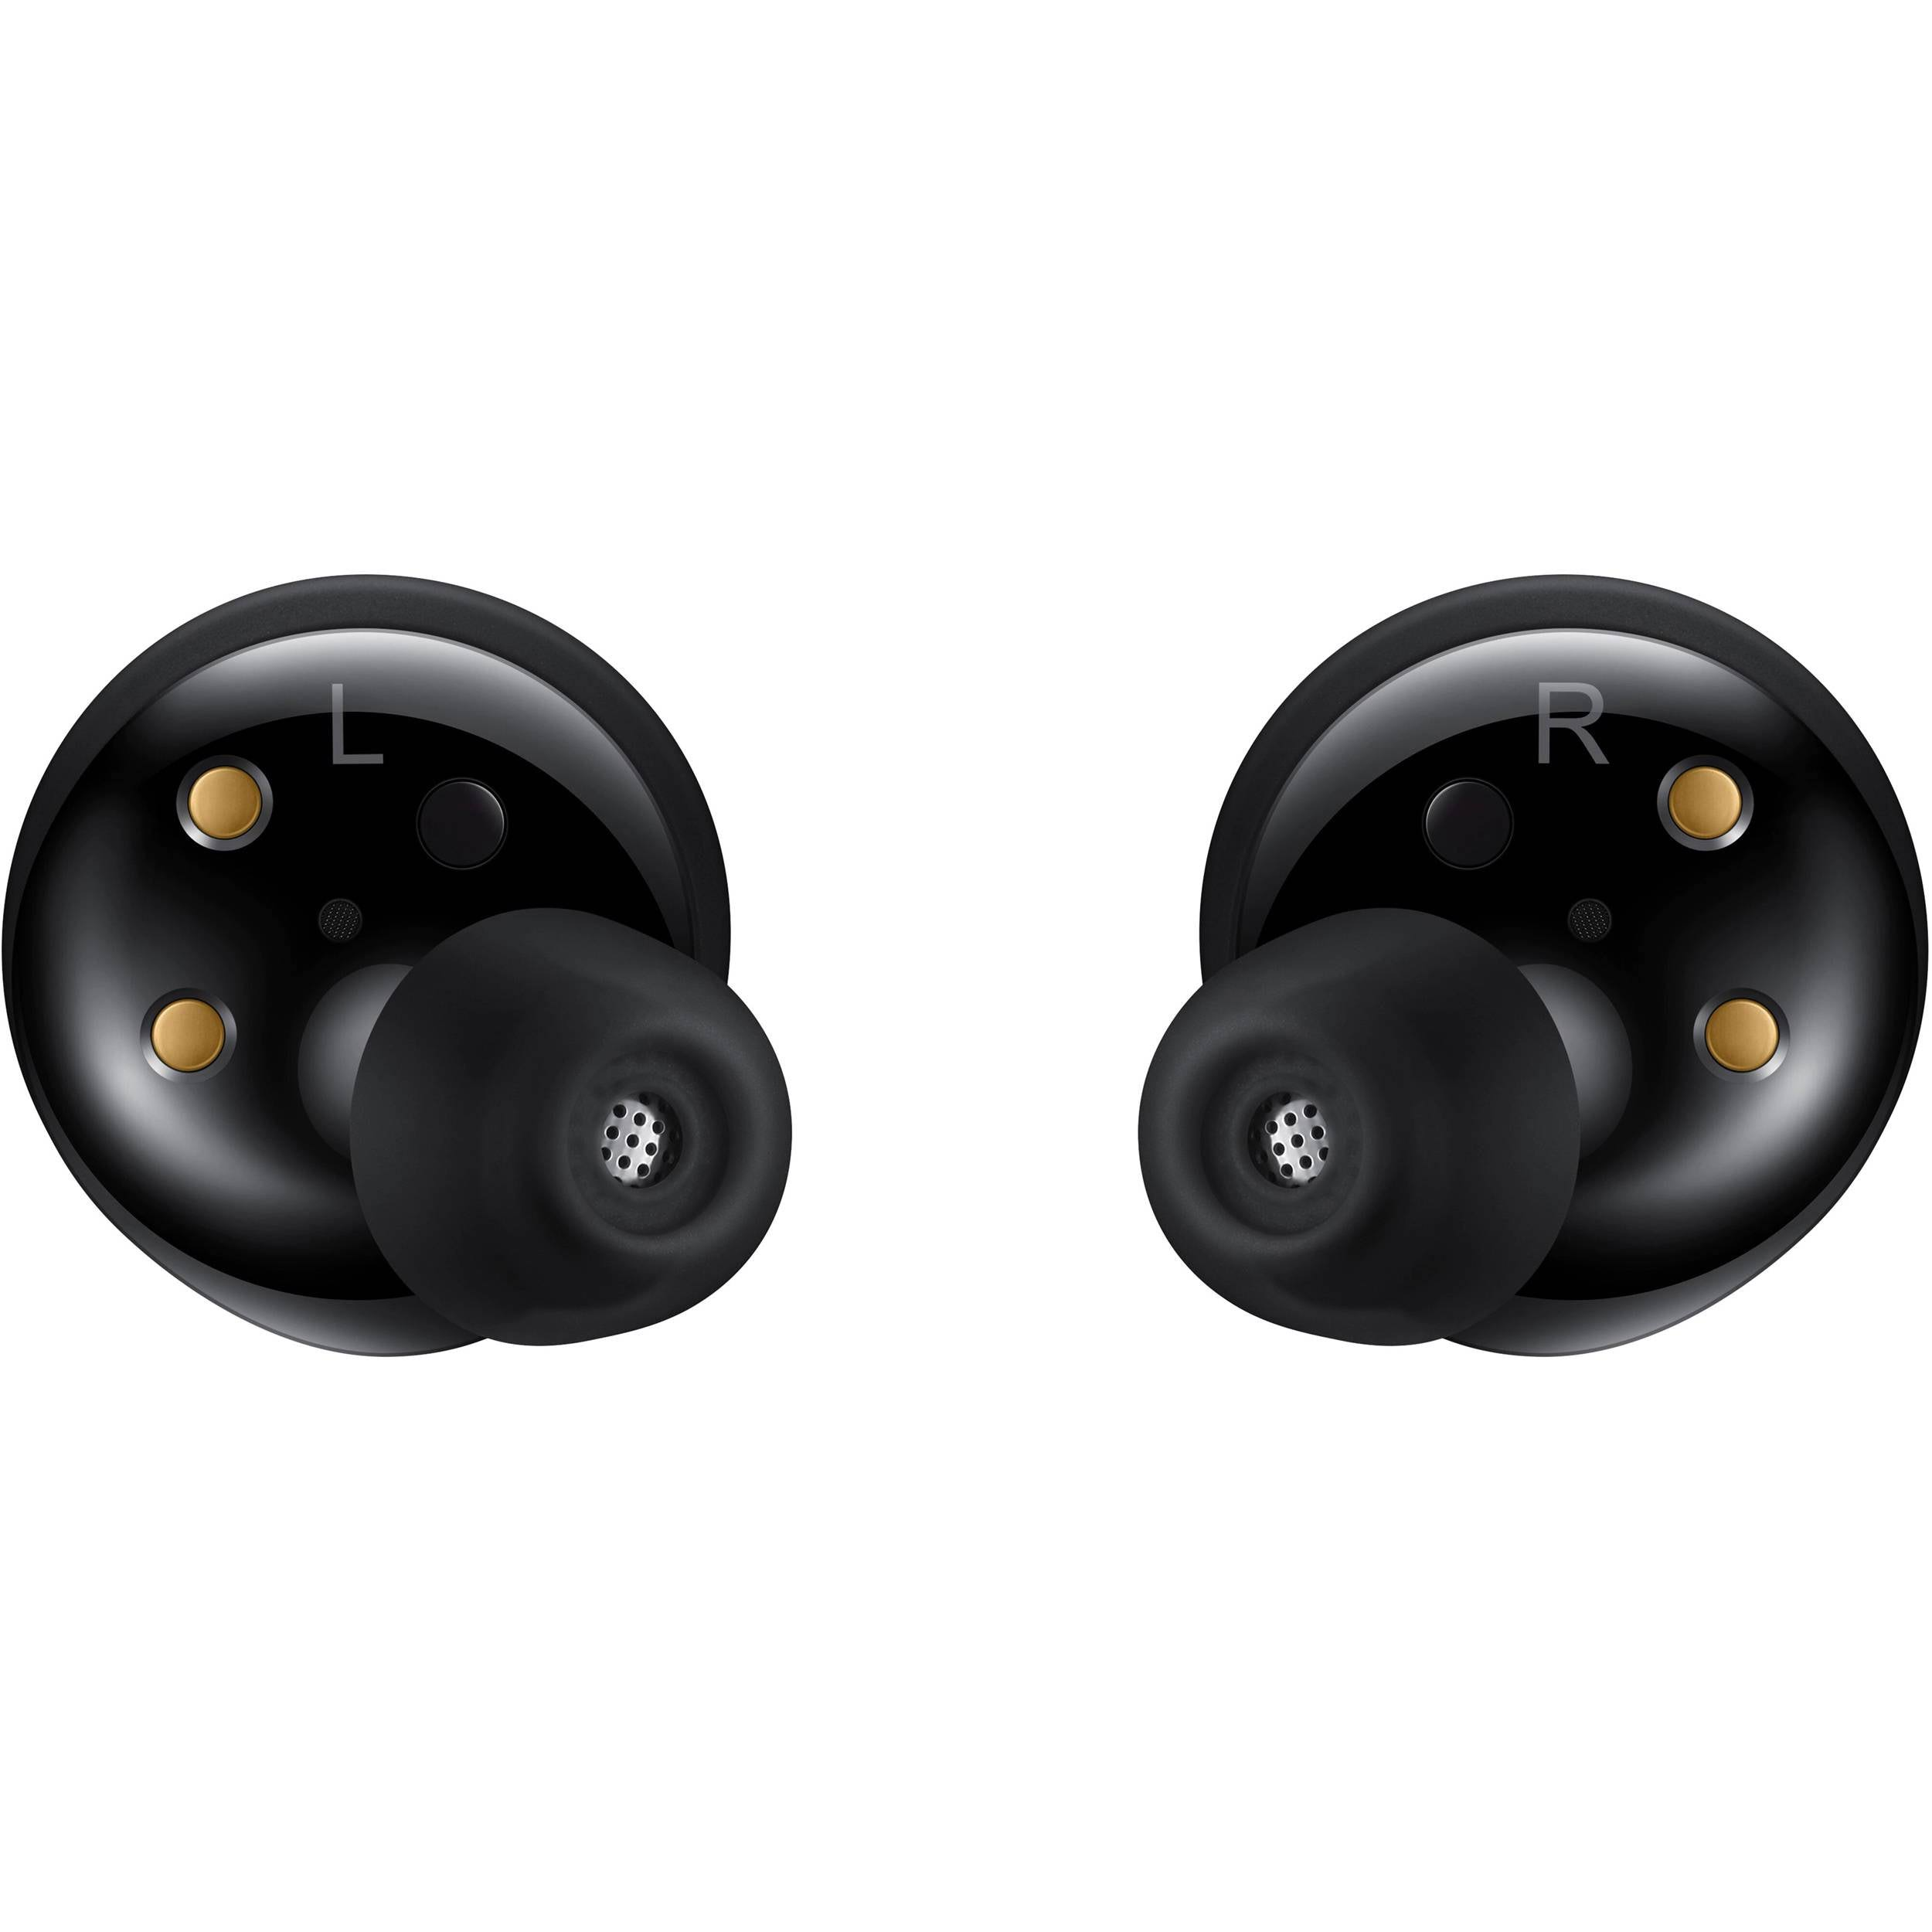 Samsung Galaxy Buds 2 Graphite (SM-R177NZKAASA), Well-Balanced Sound, Active Noise Cancelling, Comfort Fit, Up to 8 Hours of Play Time with ANC Off